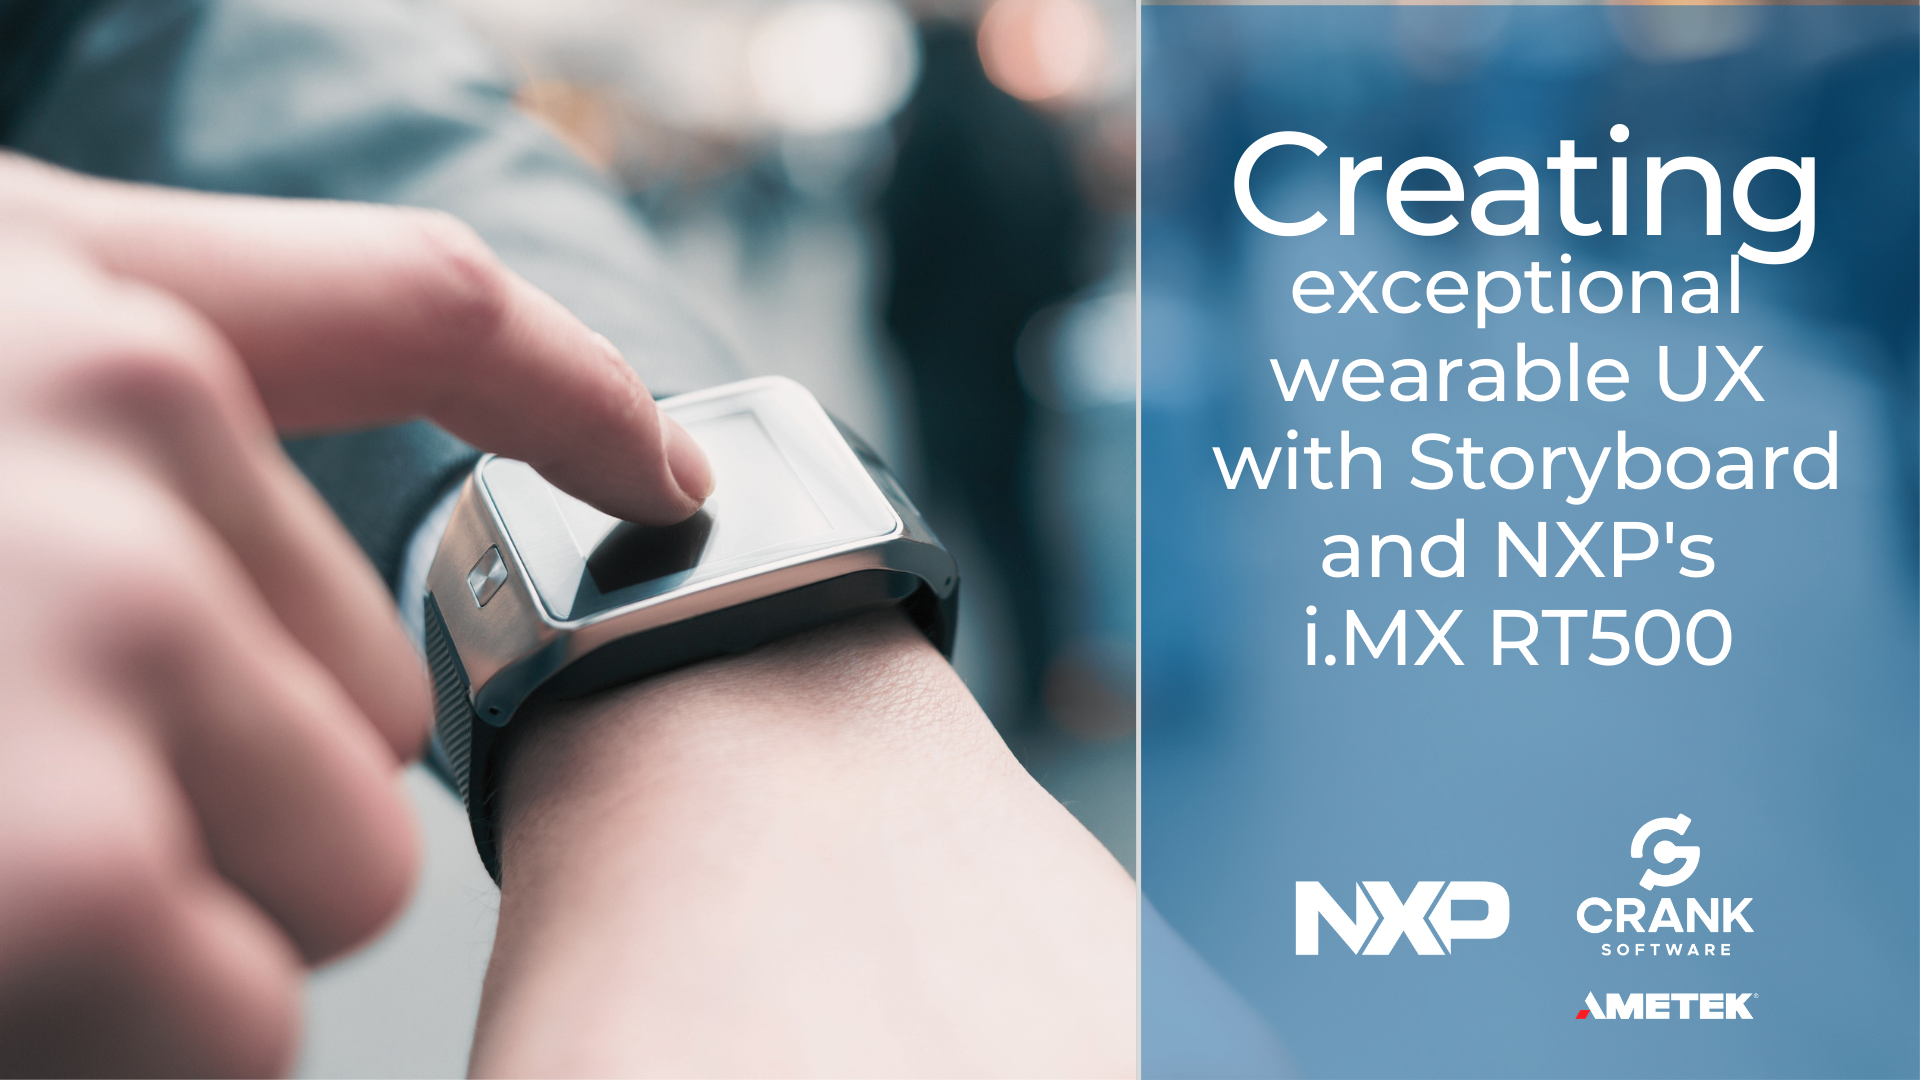 Copy of Create Exceptional Wearable UX on NXPs RT500  v2 (1)-1